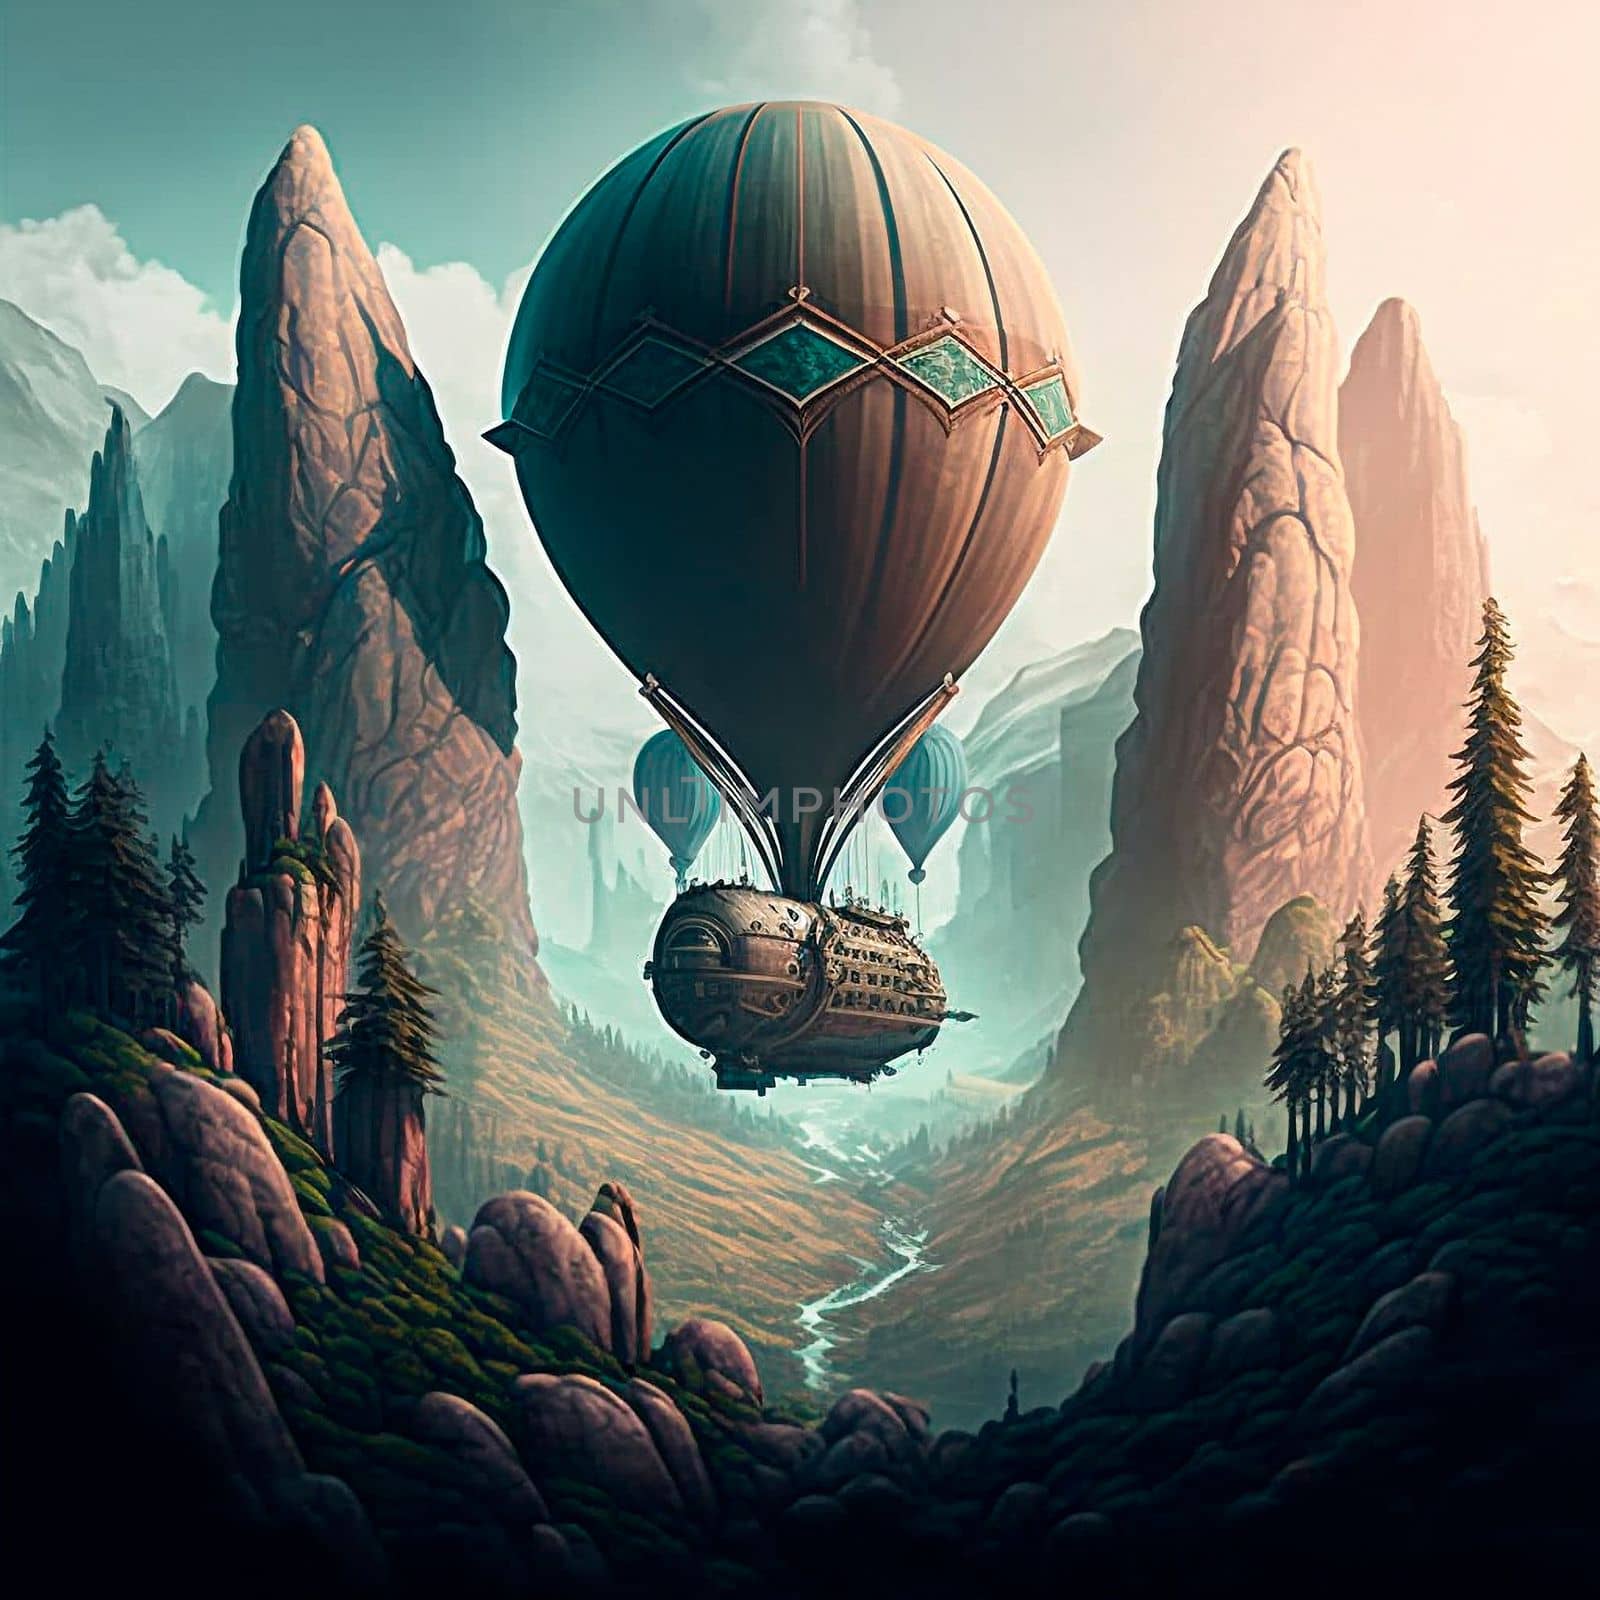 A huge airship flying in the mountains by NeuroSky